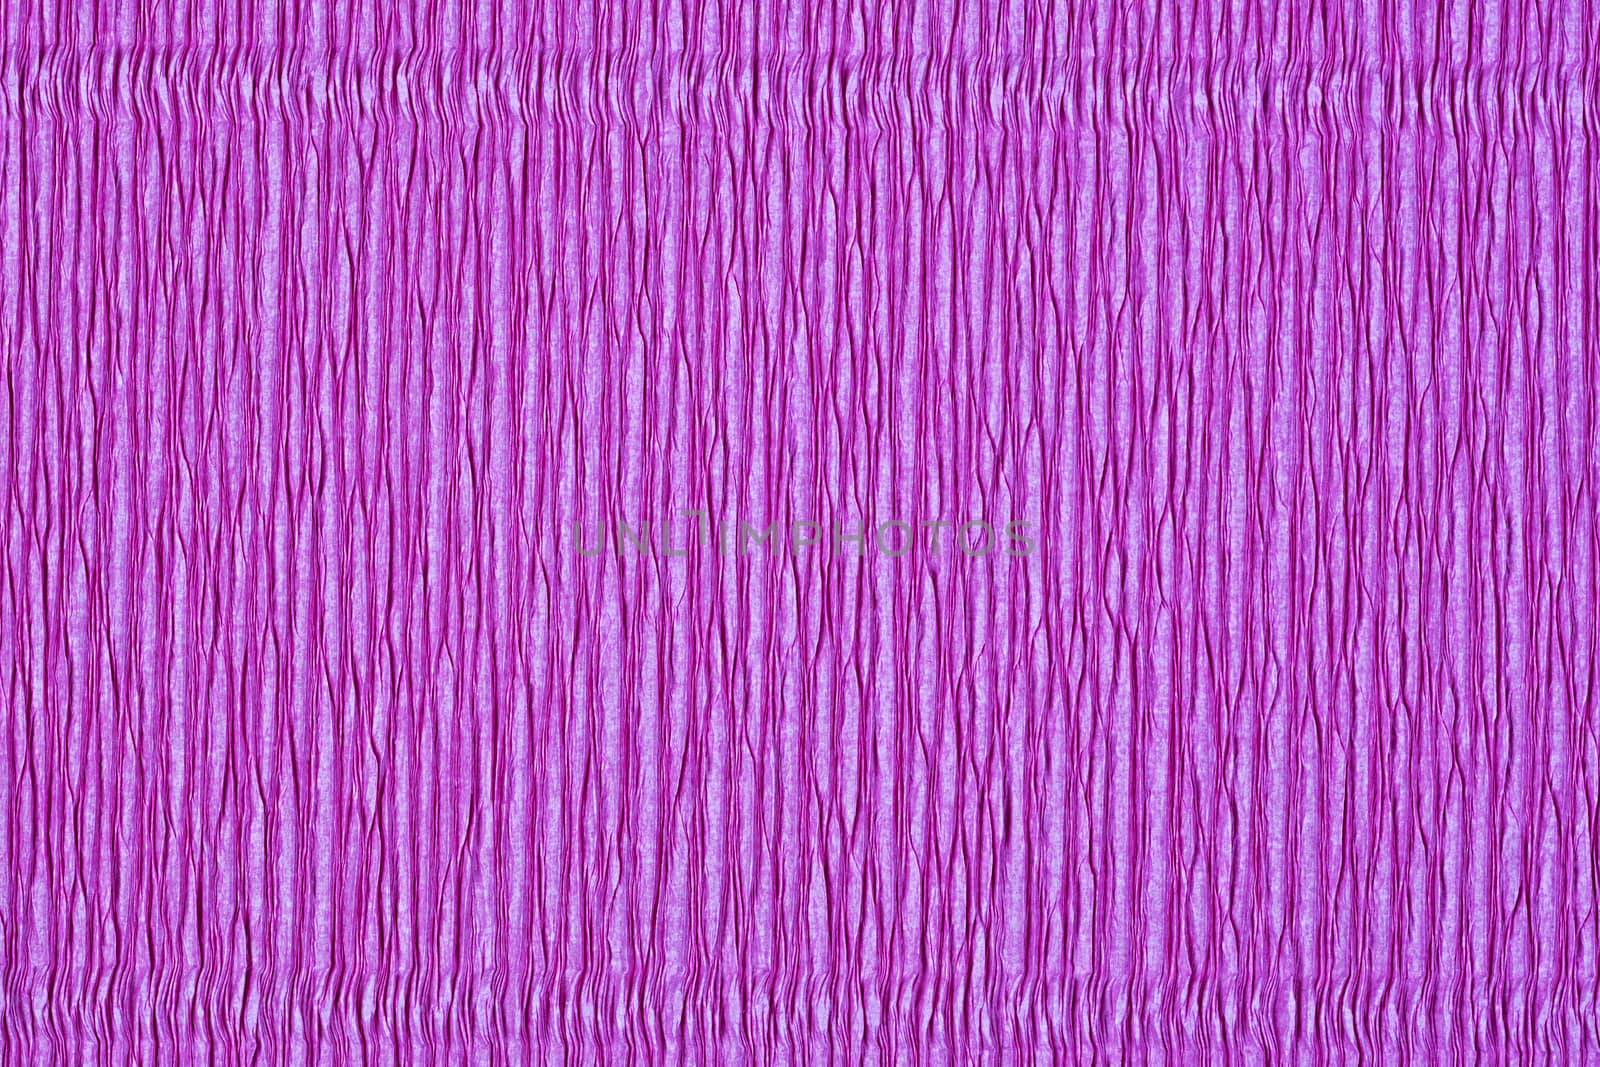 Pink paper, a background or texture